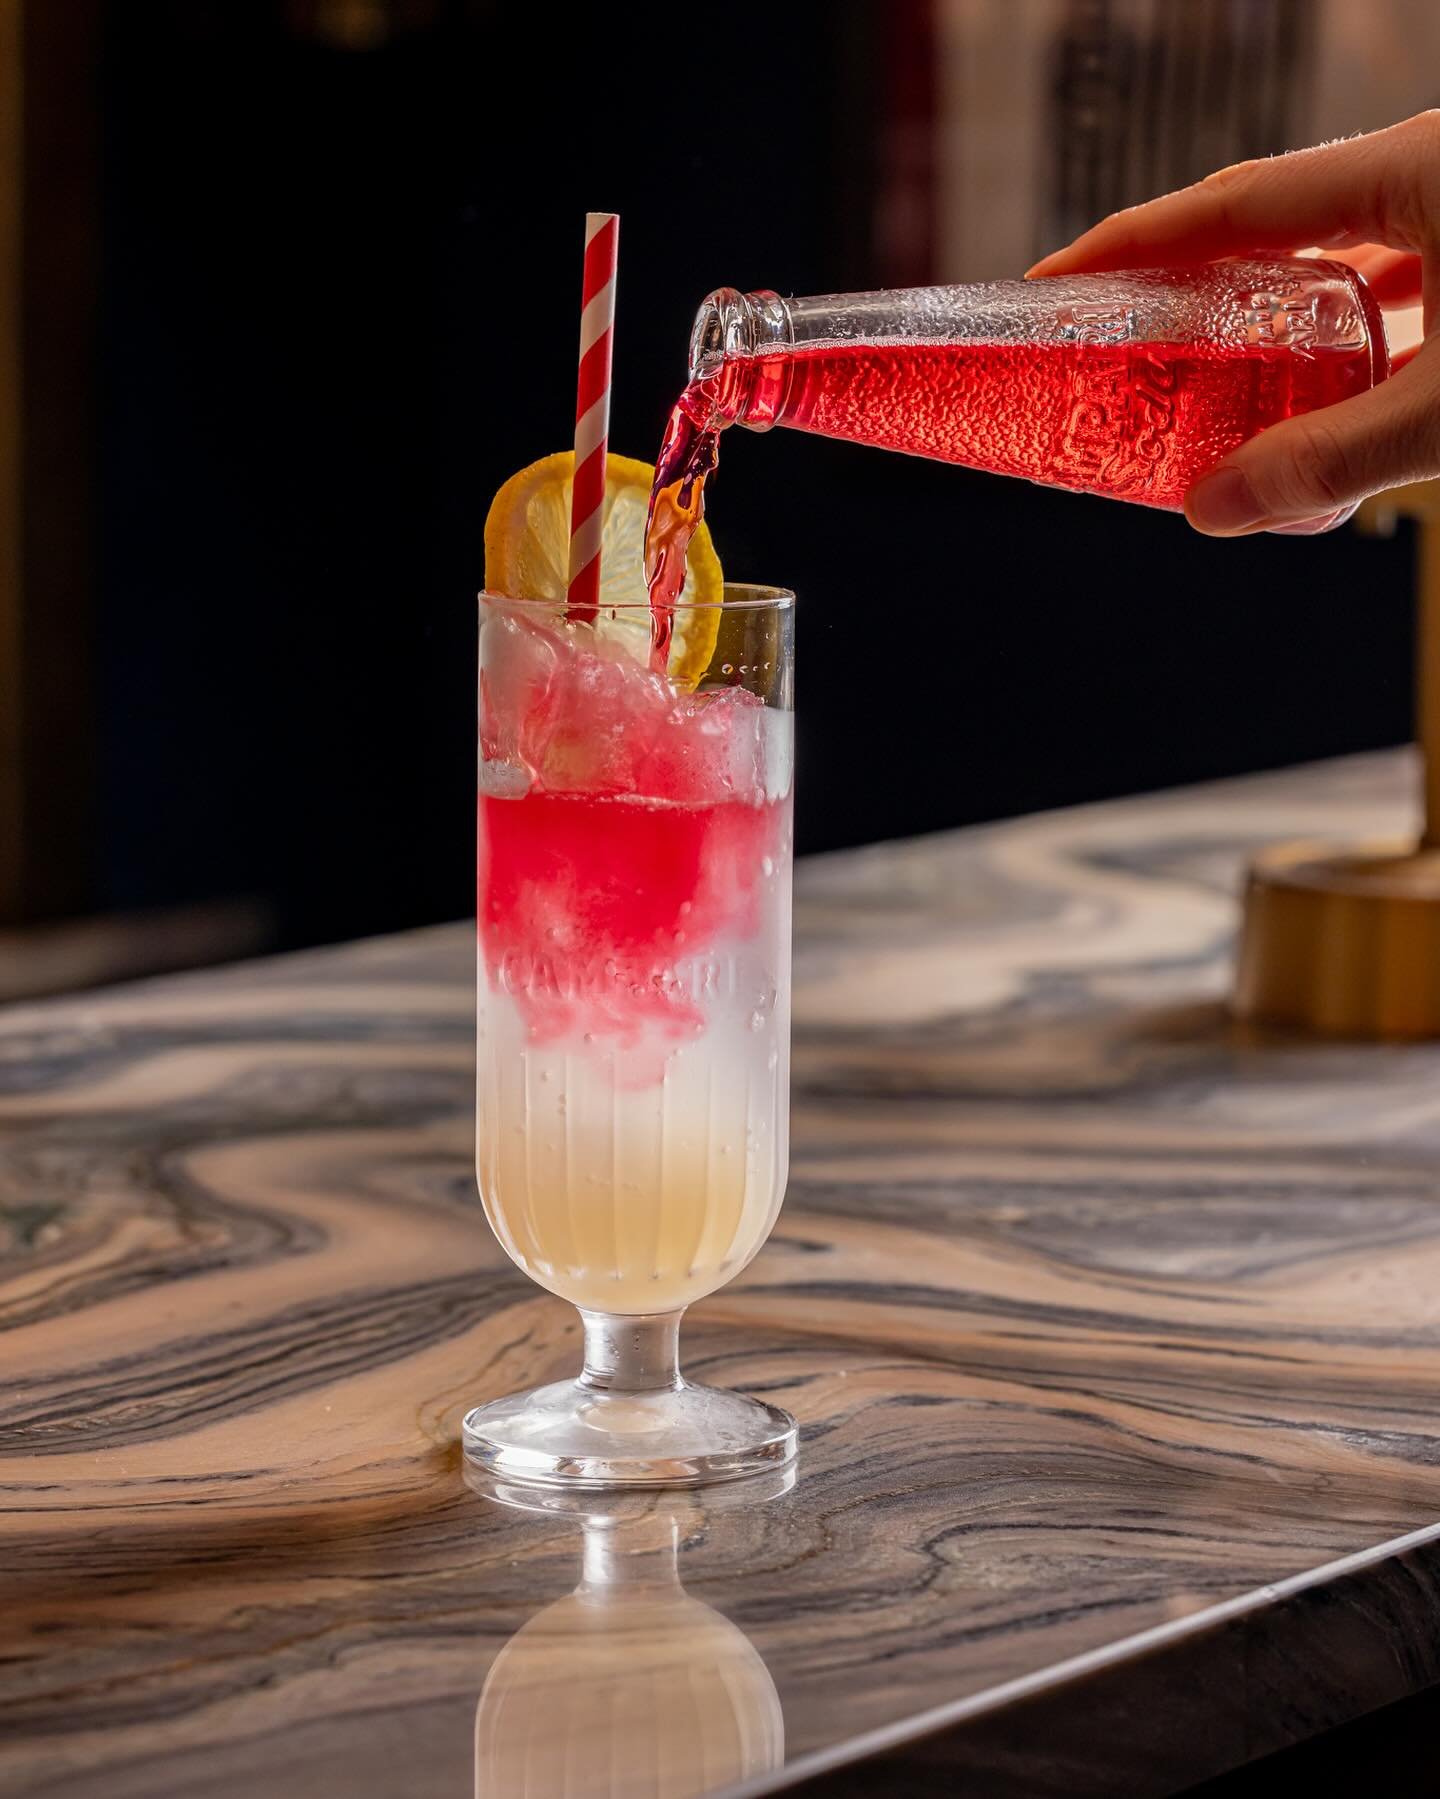 Our cocktail menu seamlessly blends modern techniques with the charm of Italy&rsquo;s rich heritage.

Savour a sip of our Campari Limone via the link in our bio.